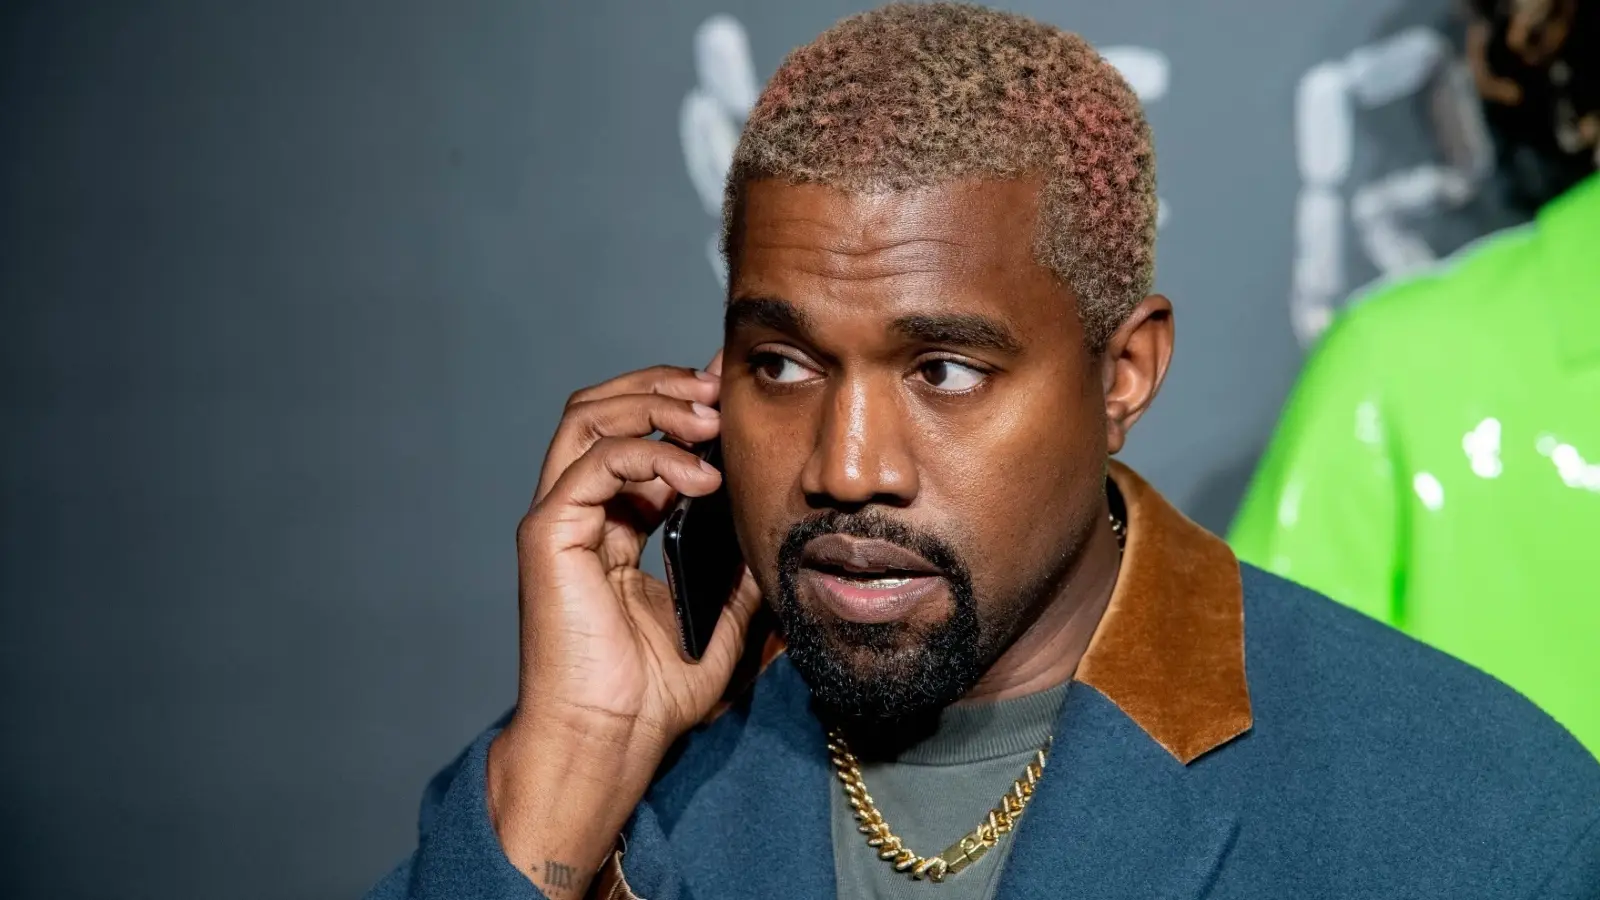 Kanye West can't seem to avoid controversy